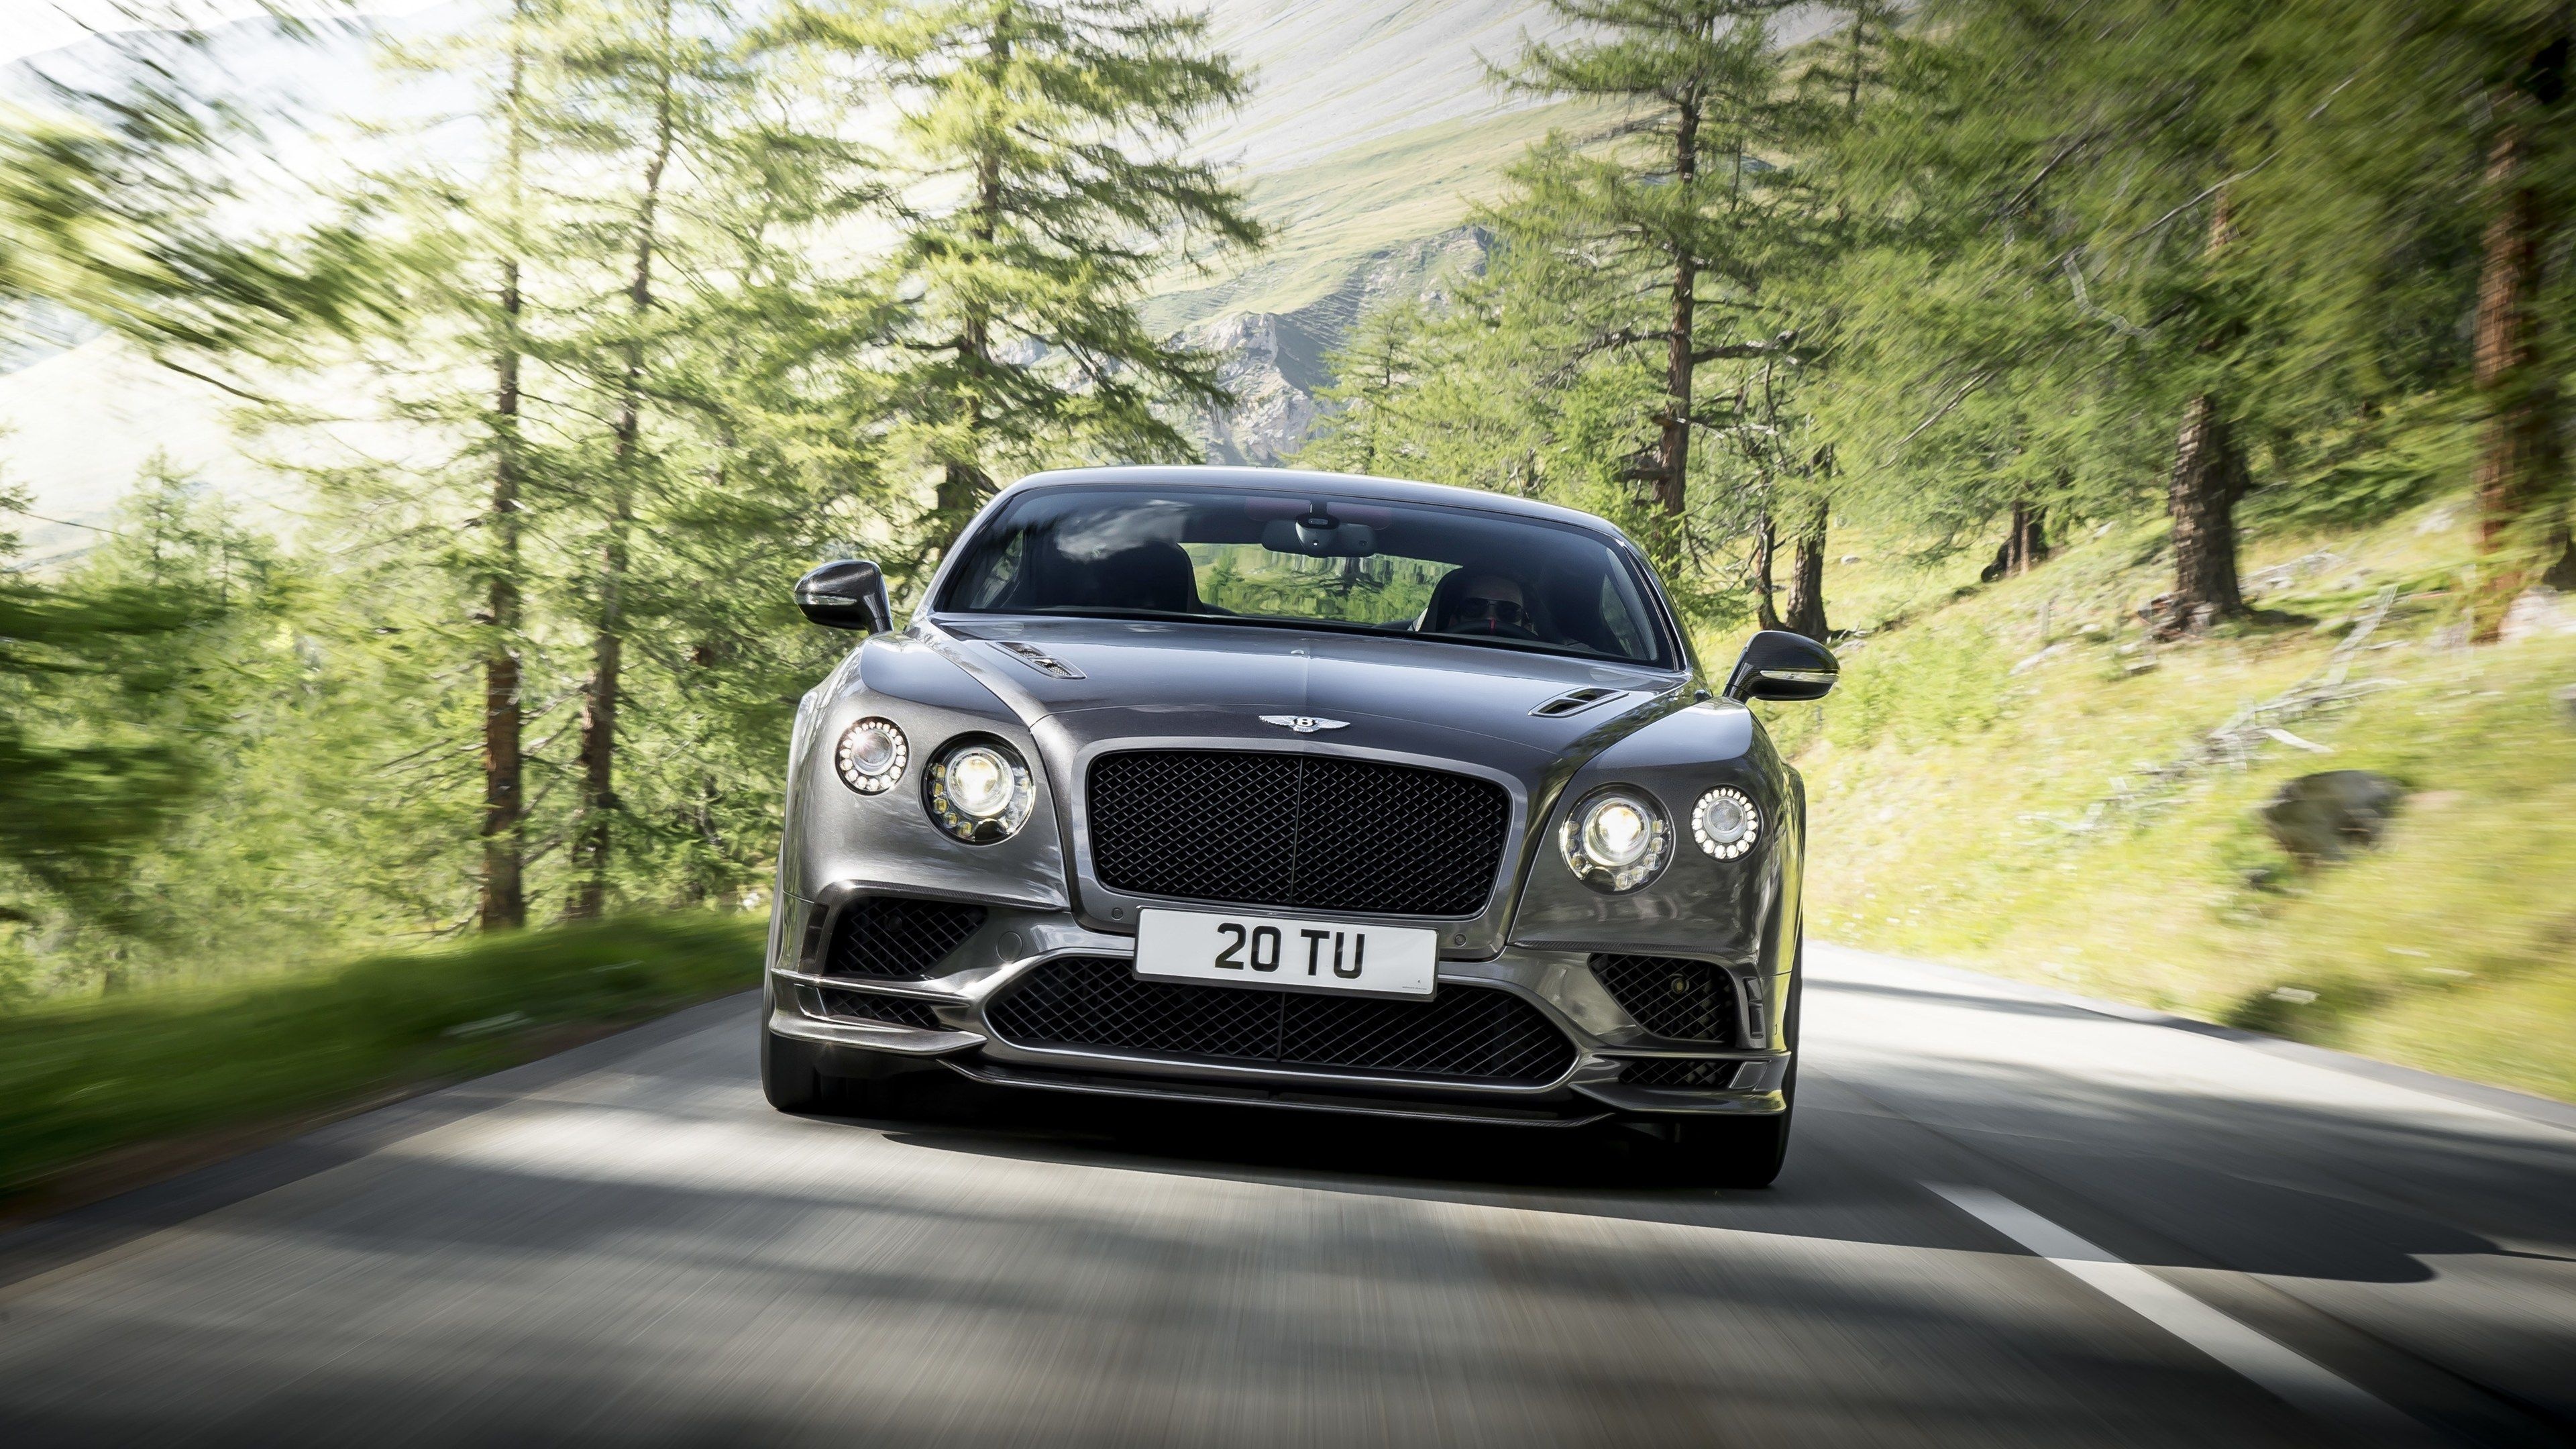 Bentley Continental GT, Supercar prowess, Speed and power, Exhilarating driving experience, 3840x2160 4K Desktop